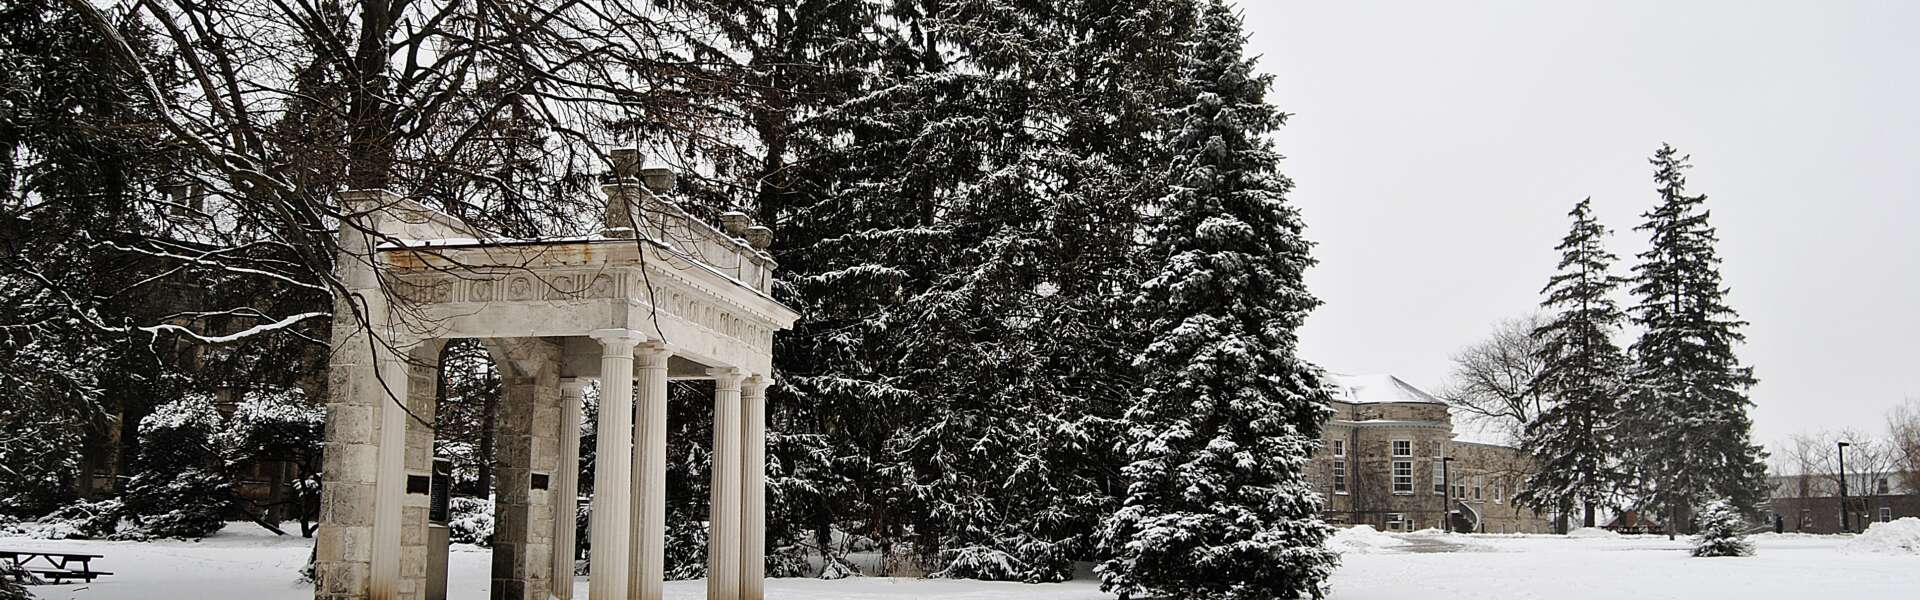 The portico on the University of Guelph campus in winter